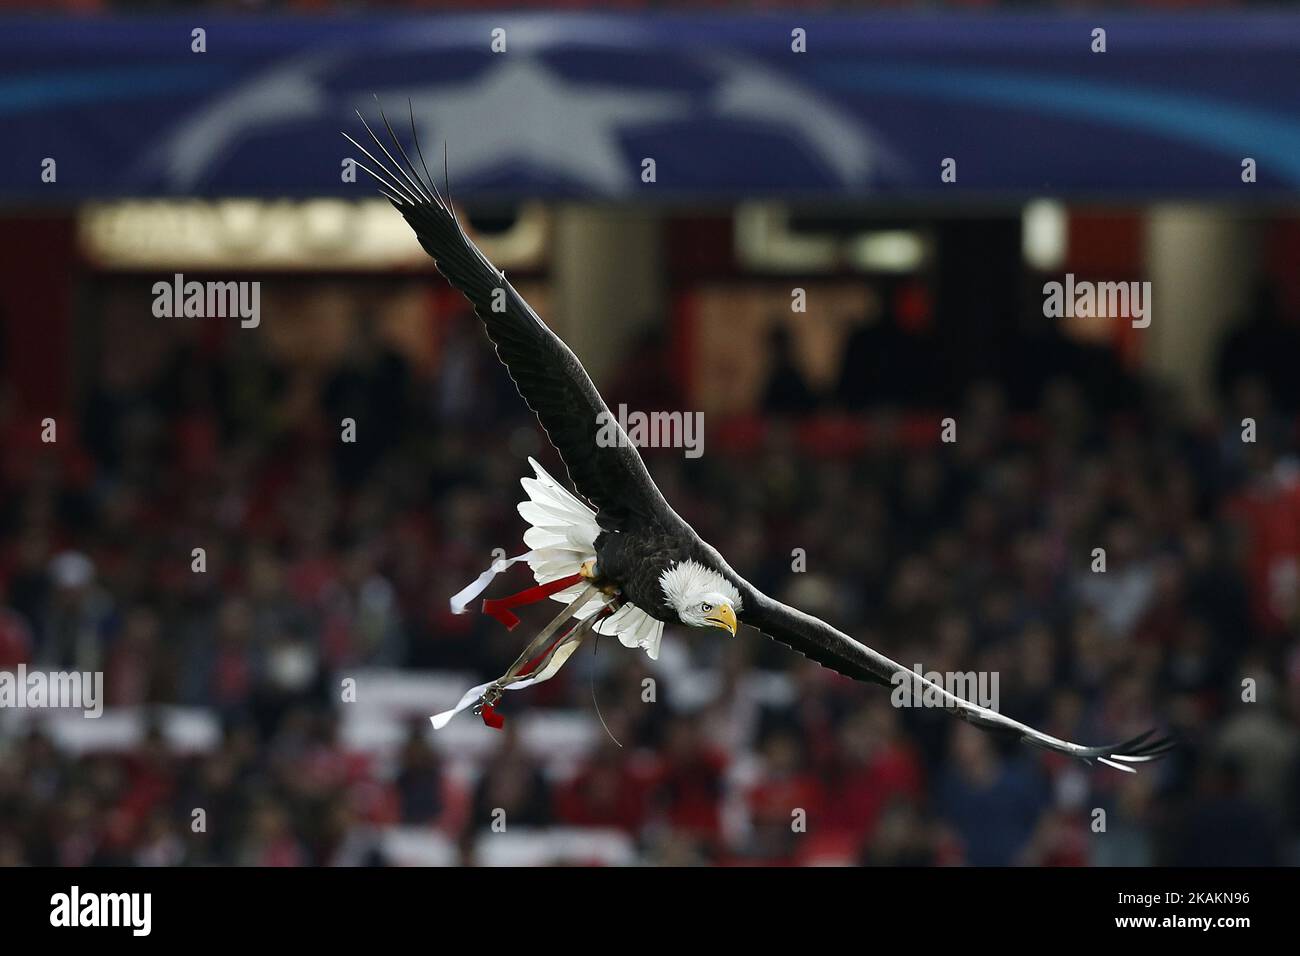 The SL Benfica eagle mascot flies into the stadium ahead of the Champions League 2016/17 match between SL Benfica vs BVB Borussia Dortmund, in Lisbon, on February 14, 2017. (Photo by Carlos Palma/NurPhoto) *** Please Use Credit from Credit Field *** Stock Photo